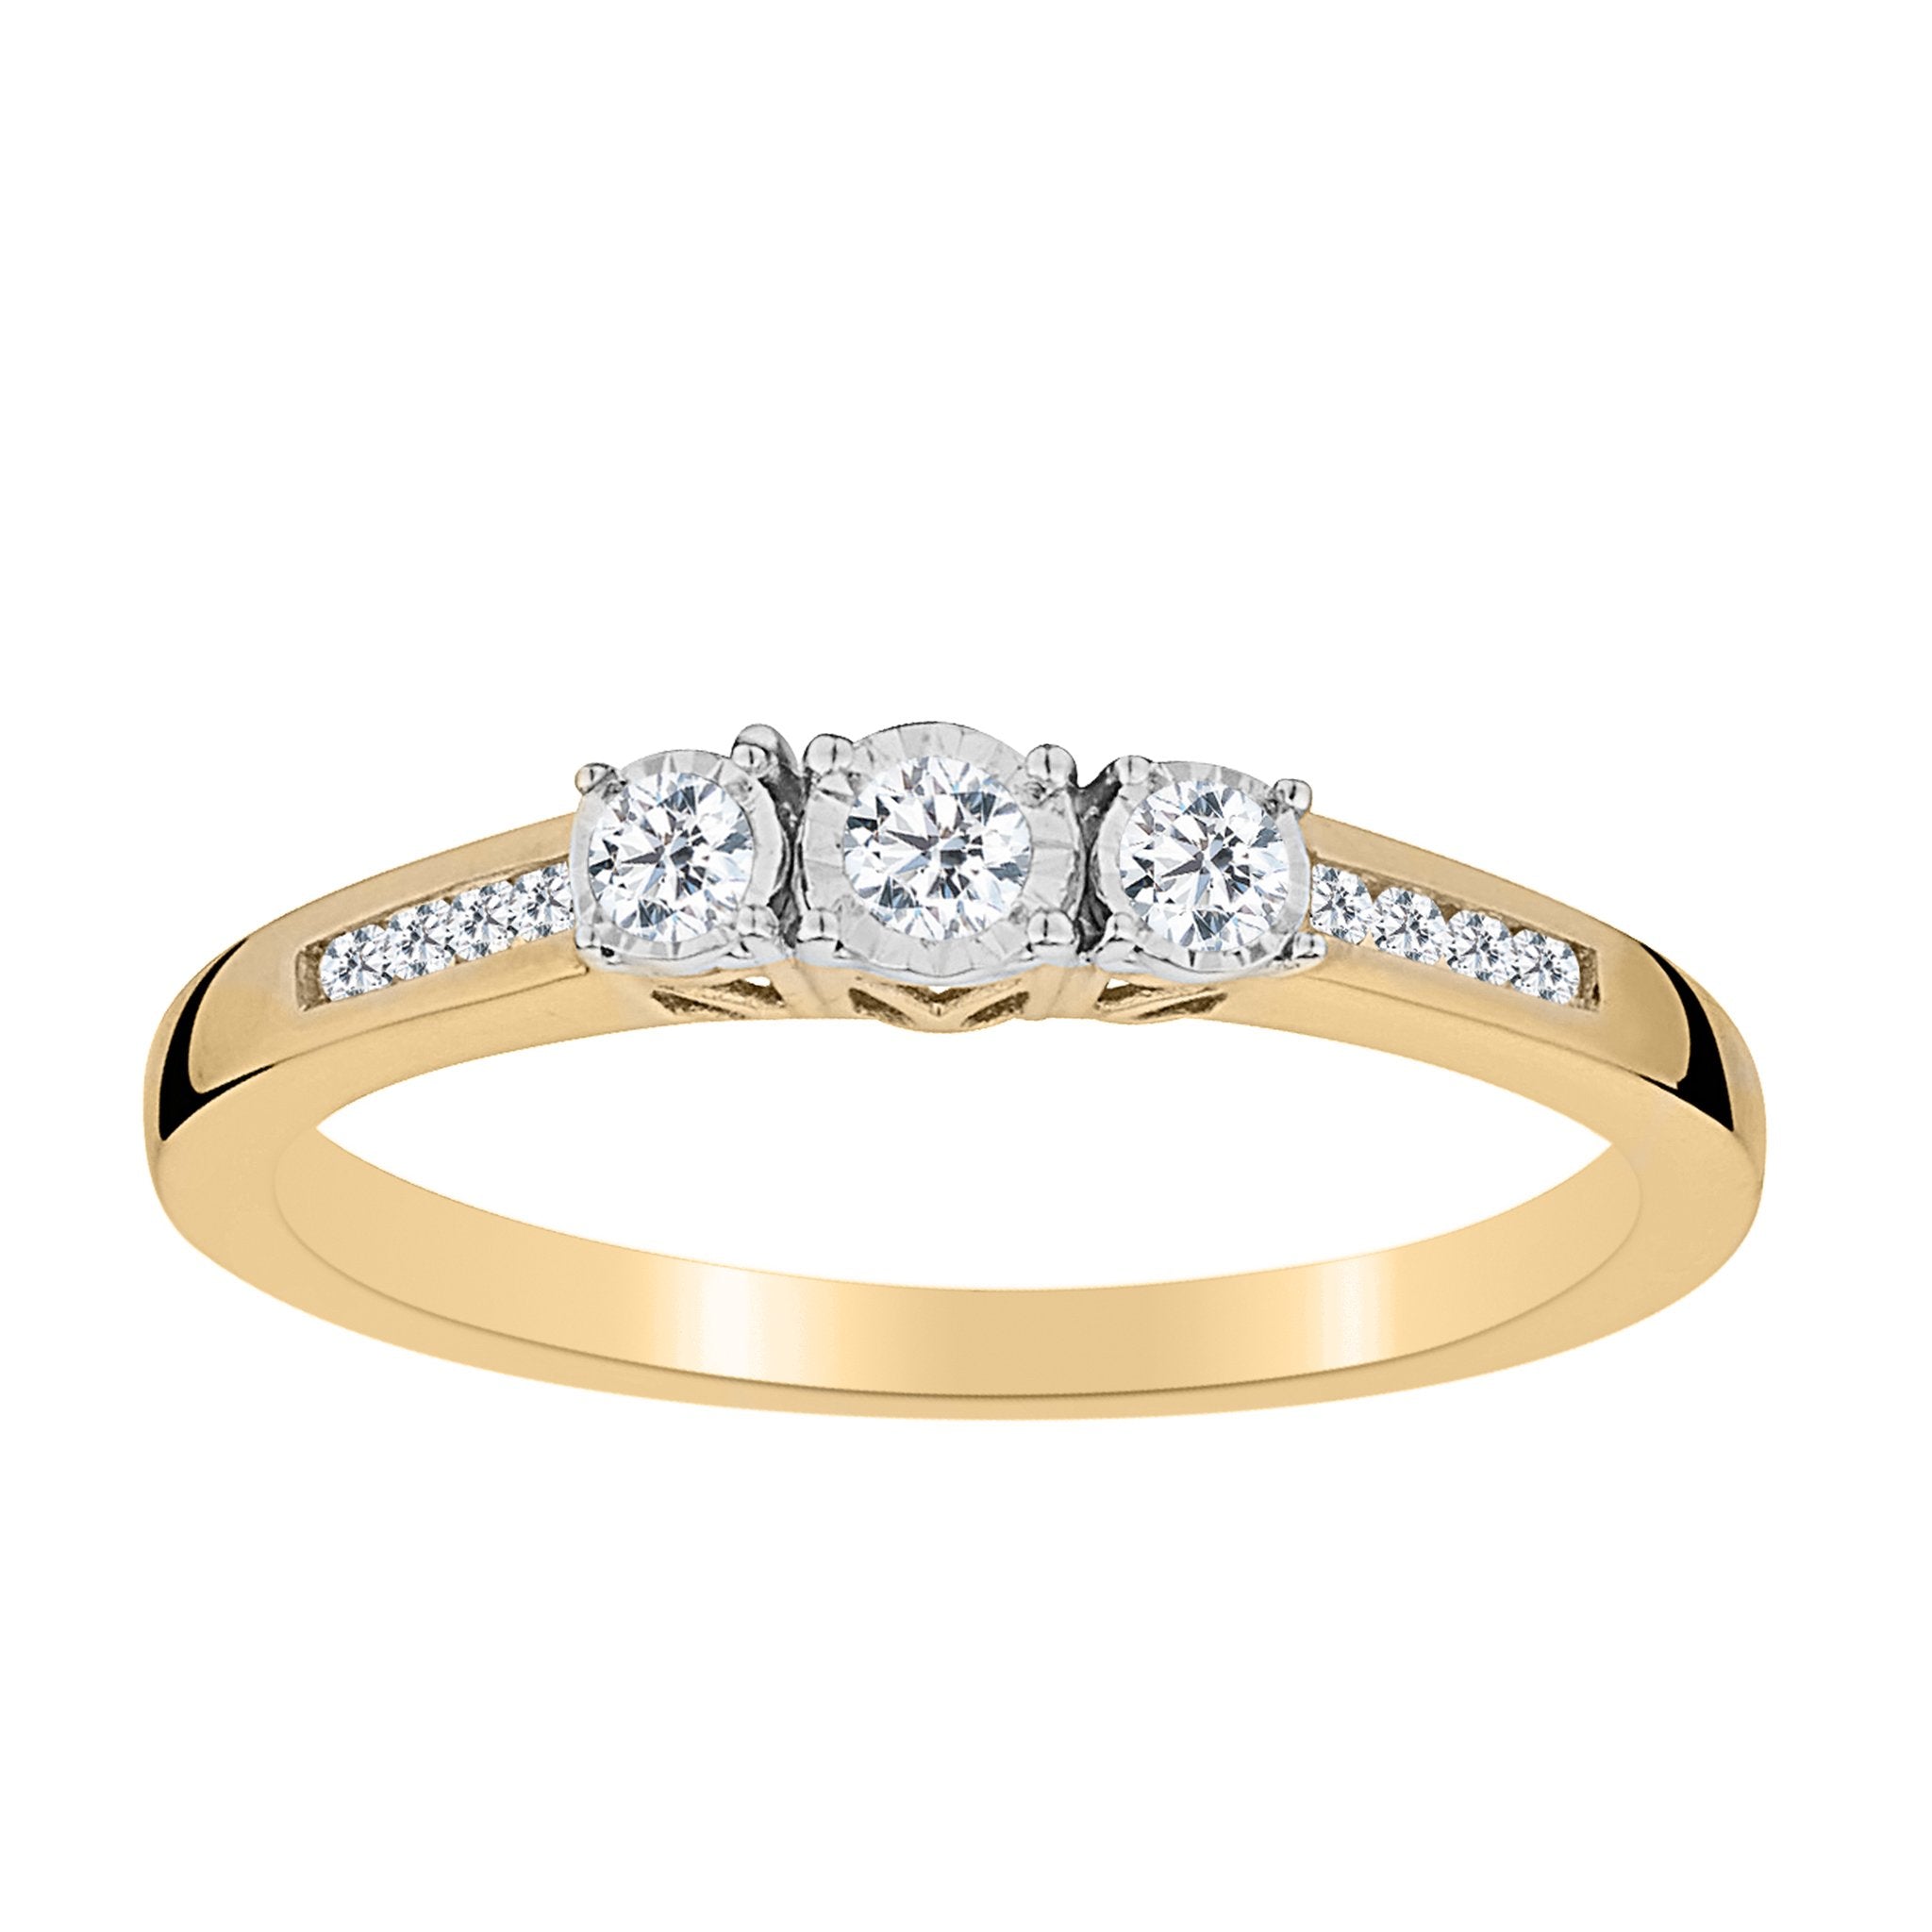 .20 CARAT DIAMOND "PAST, PRESENT, FUTURE" RING, 10kt YELLOW GOLD…...................NOW - Griffin Jewellery Designs